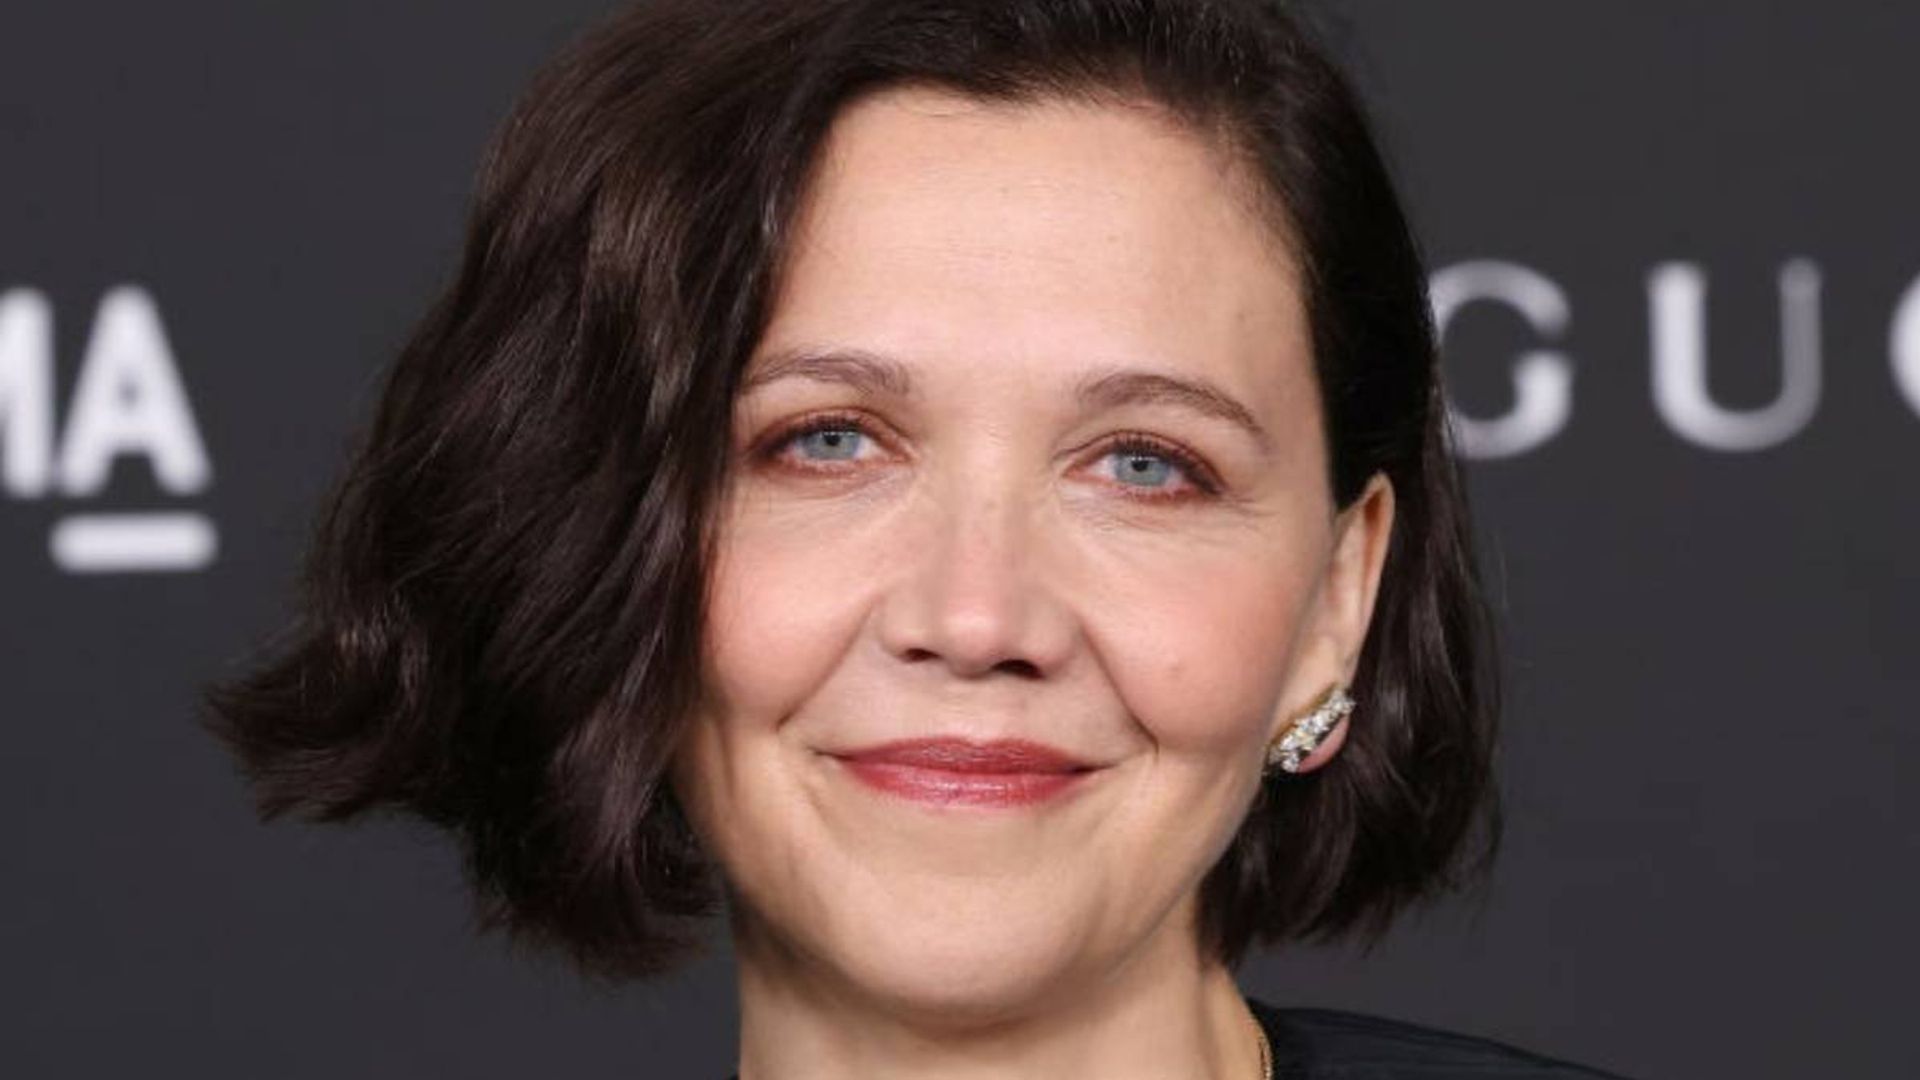 Maggie Gyllenhaal's teenage daughter makes very rare appearance with famous mom - and they look so alike